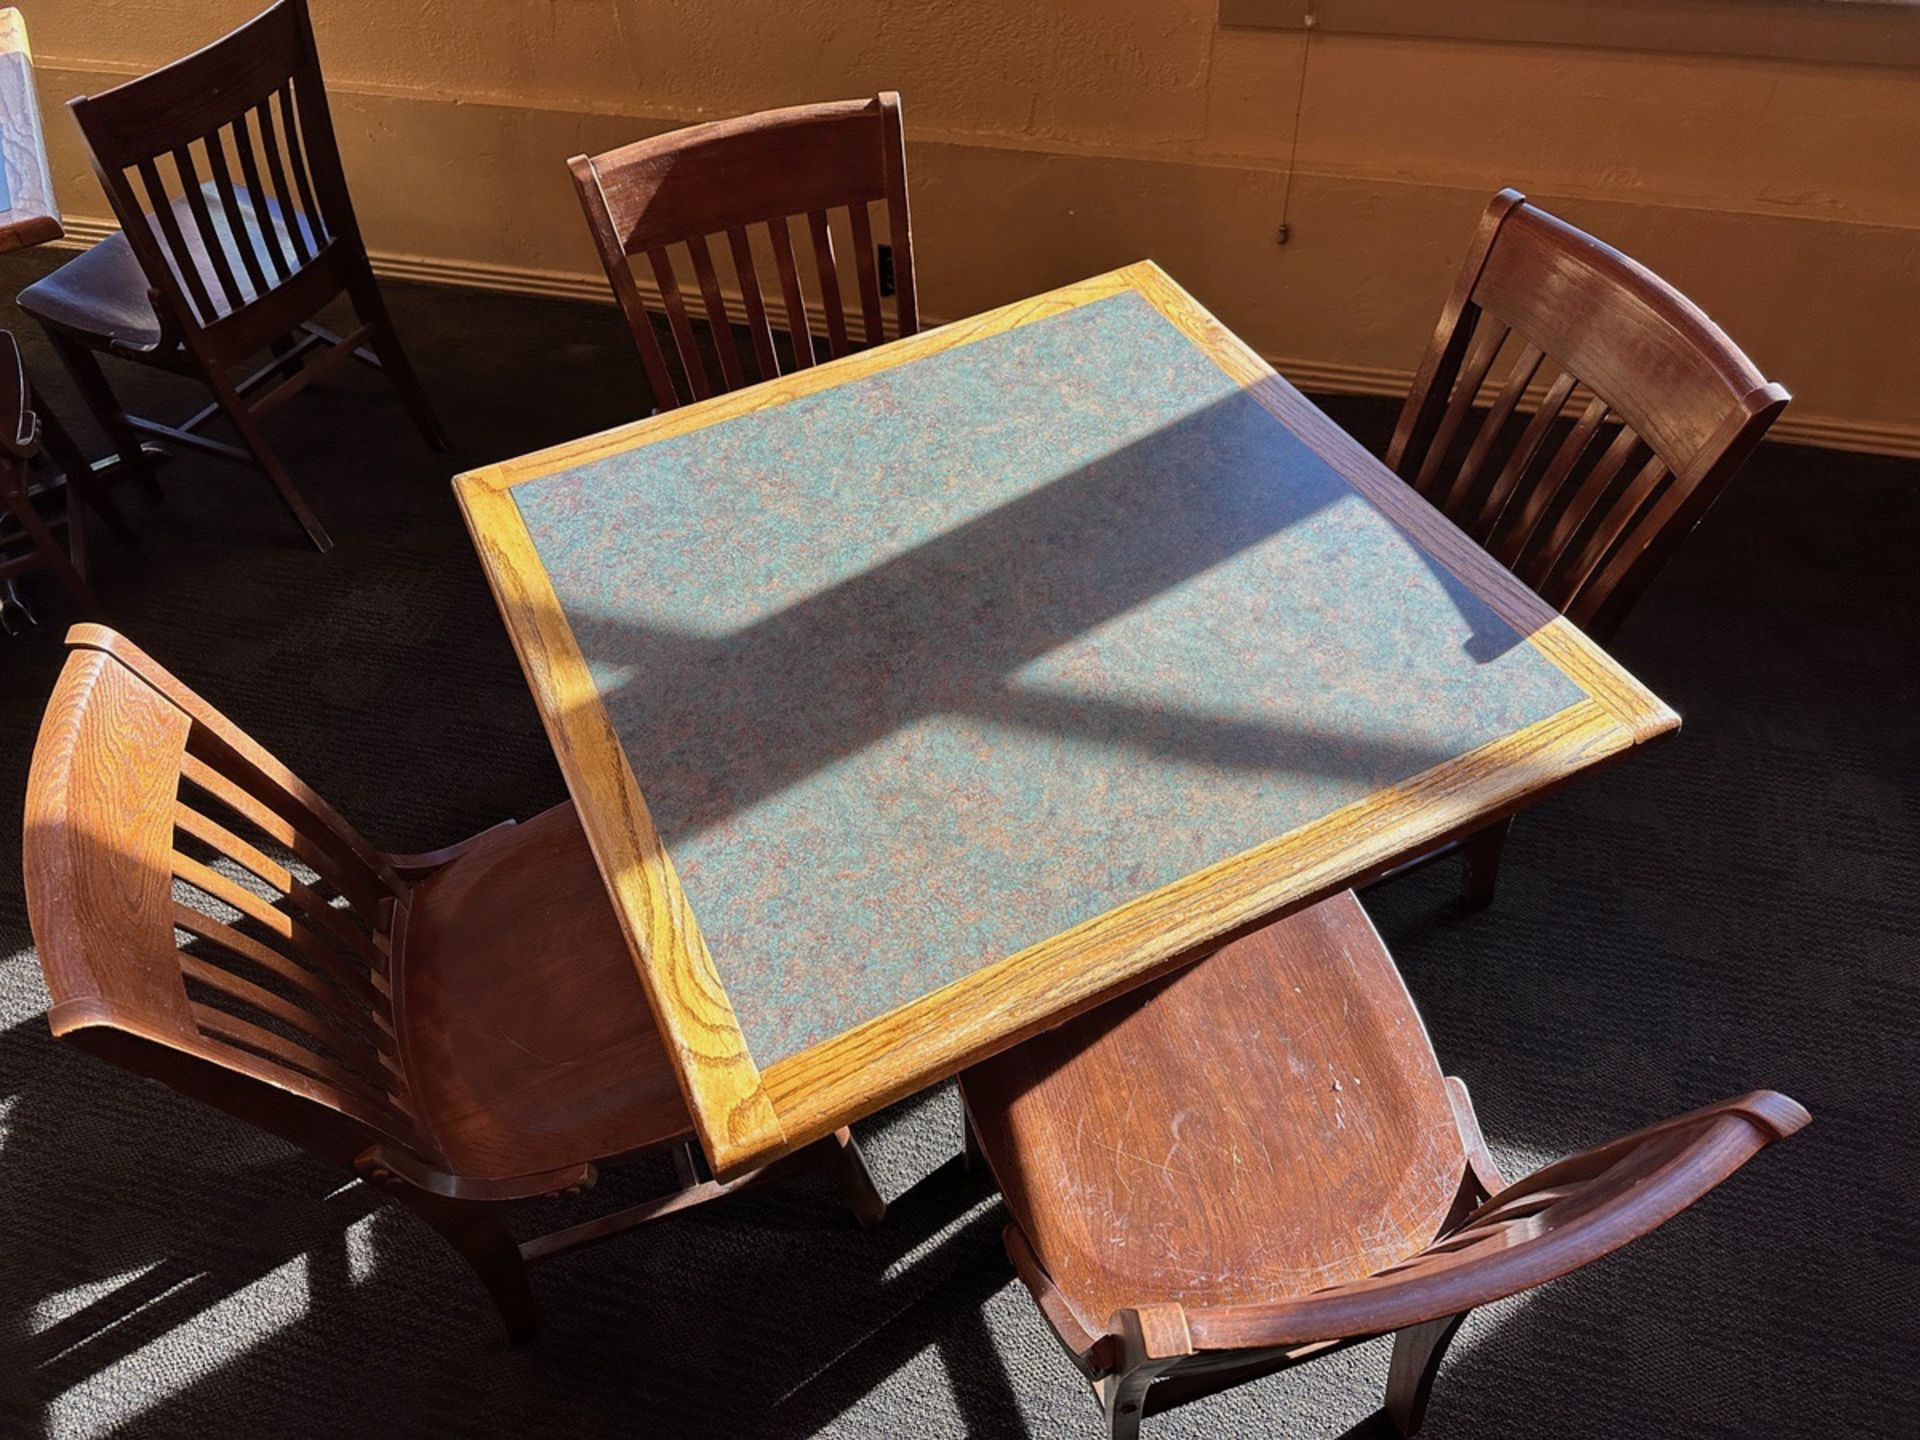 Lot of (13) 3' x 3' Lowtop Tables with (4) Chairs - Subj to Bulk | Rig Fee $75